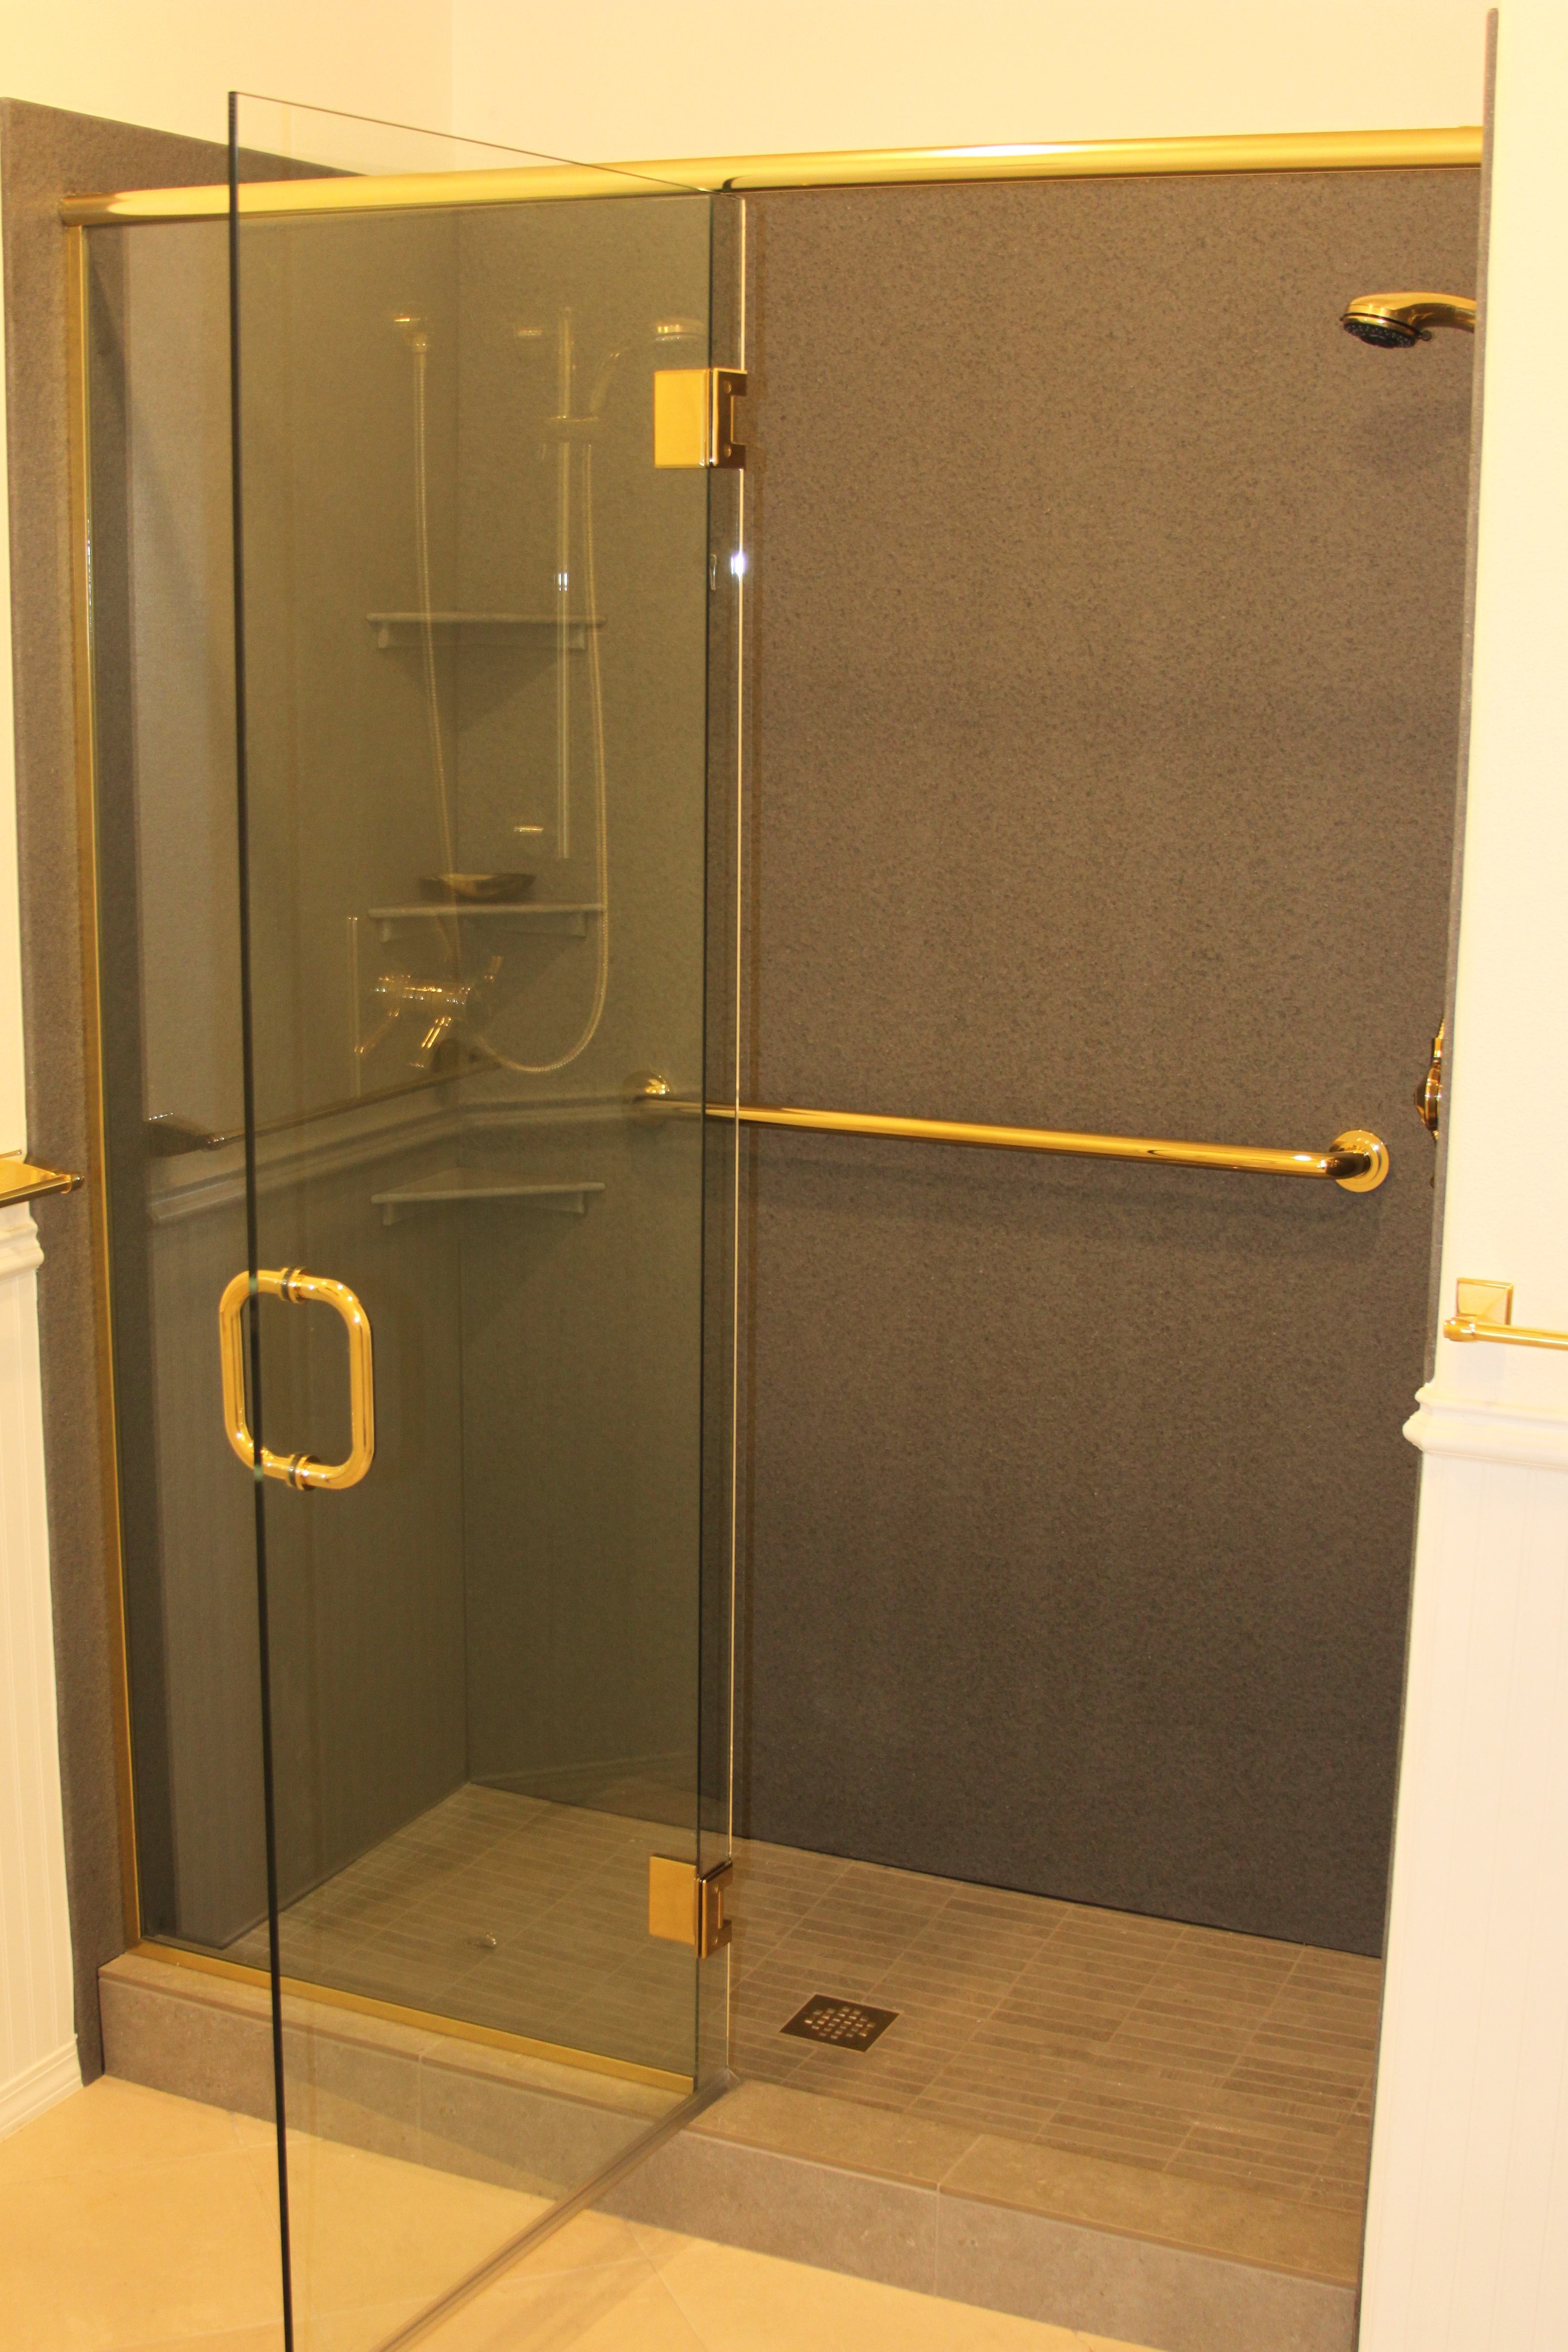 What Is The Best Material For Shower Walls Rose Construction Inc